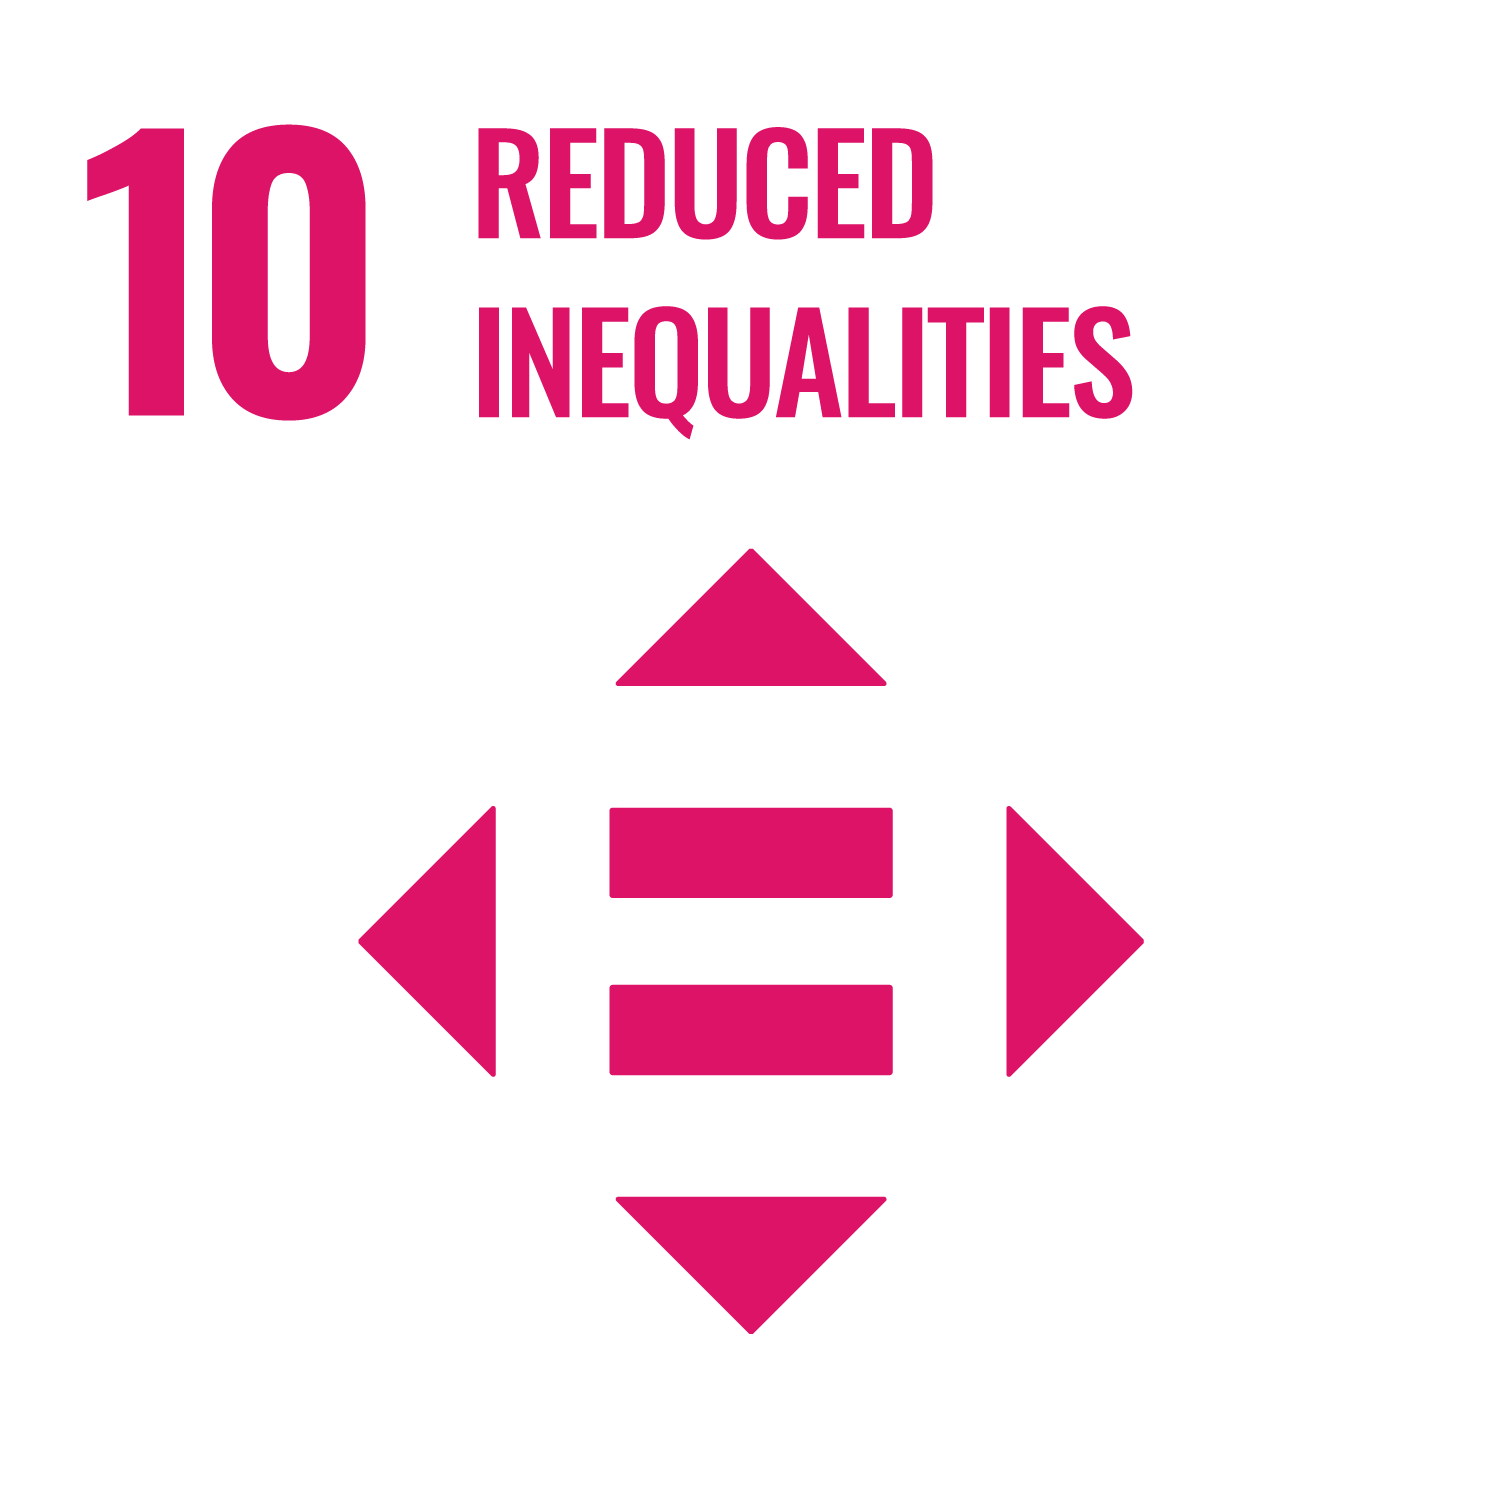 Image for Reduced Inequalities Sustainable Development Goal